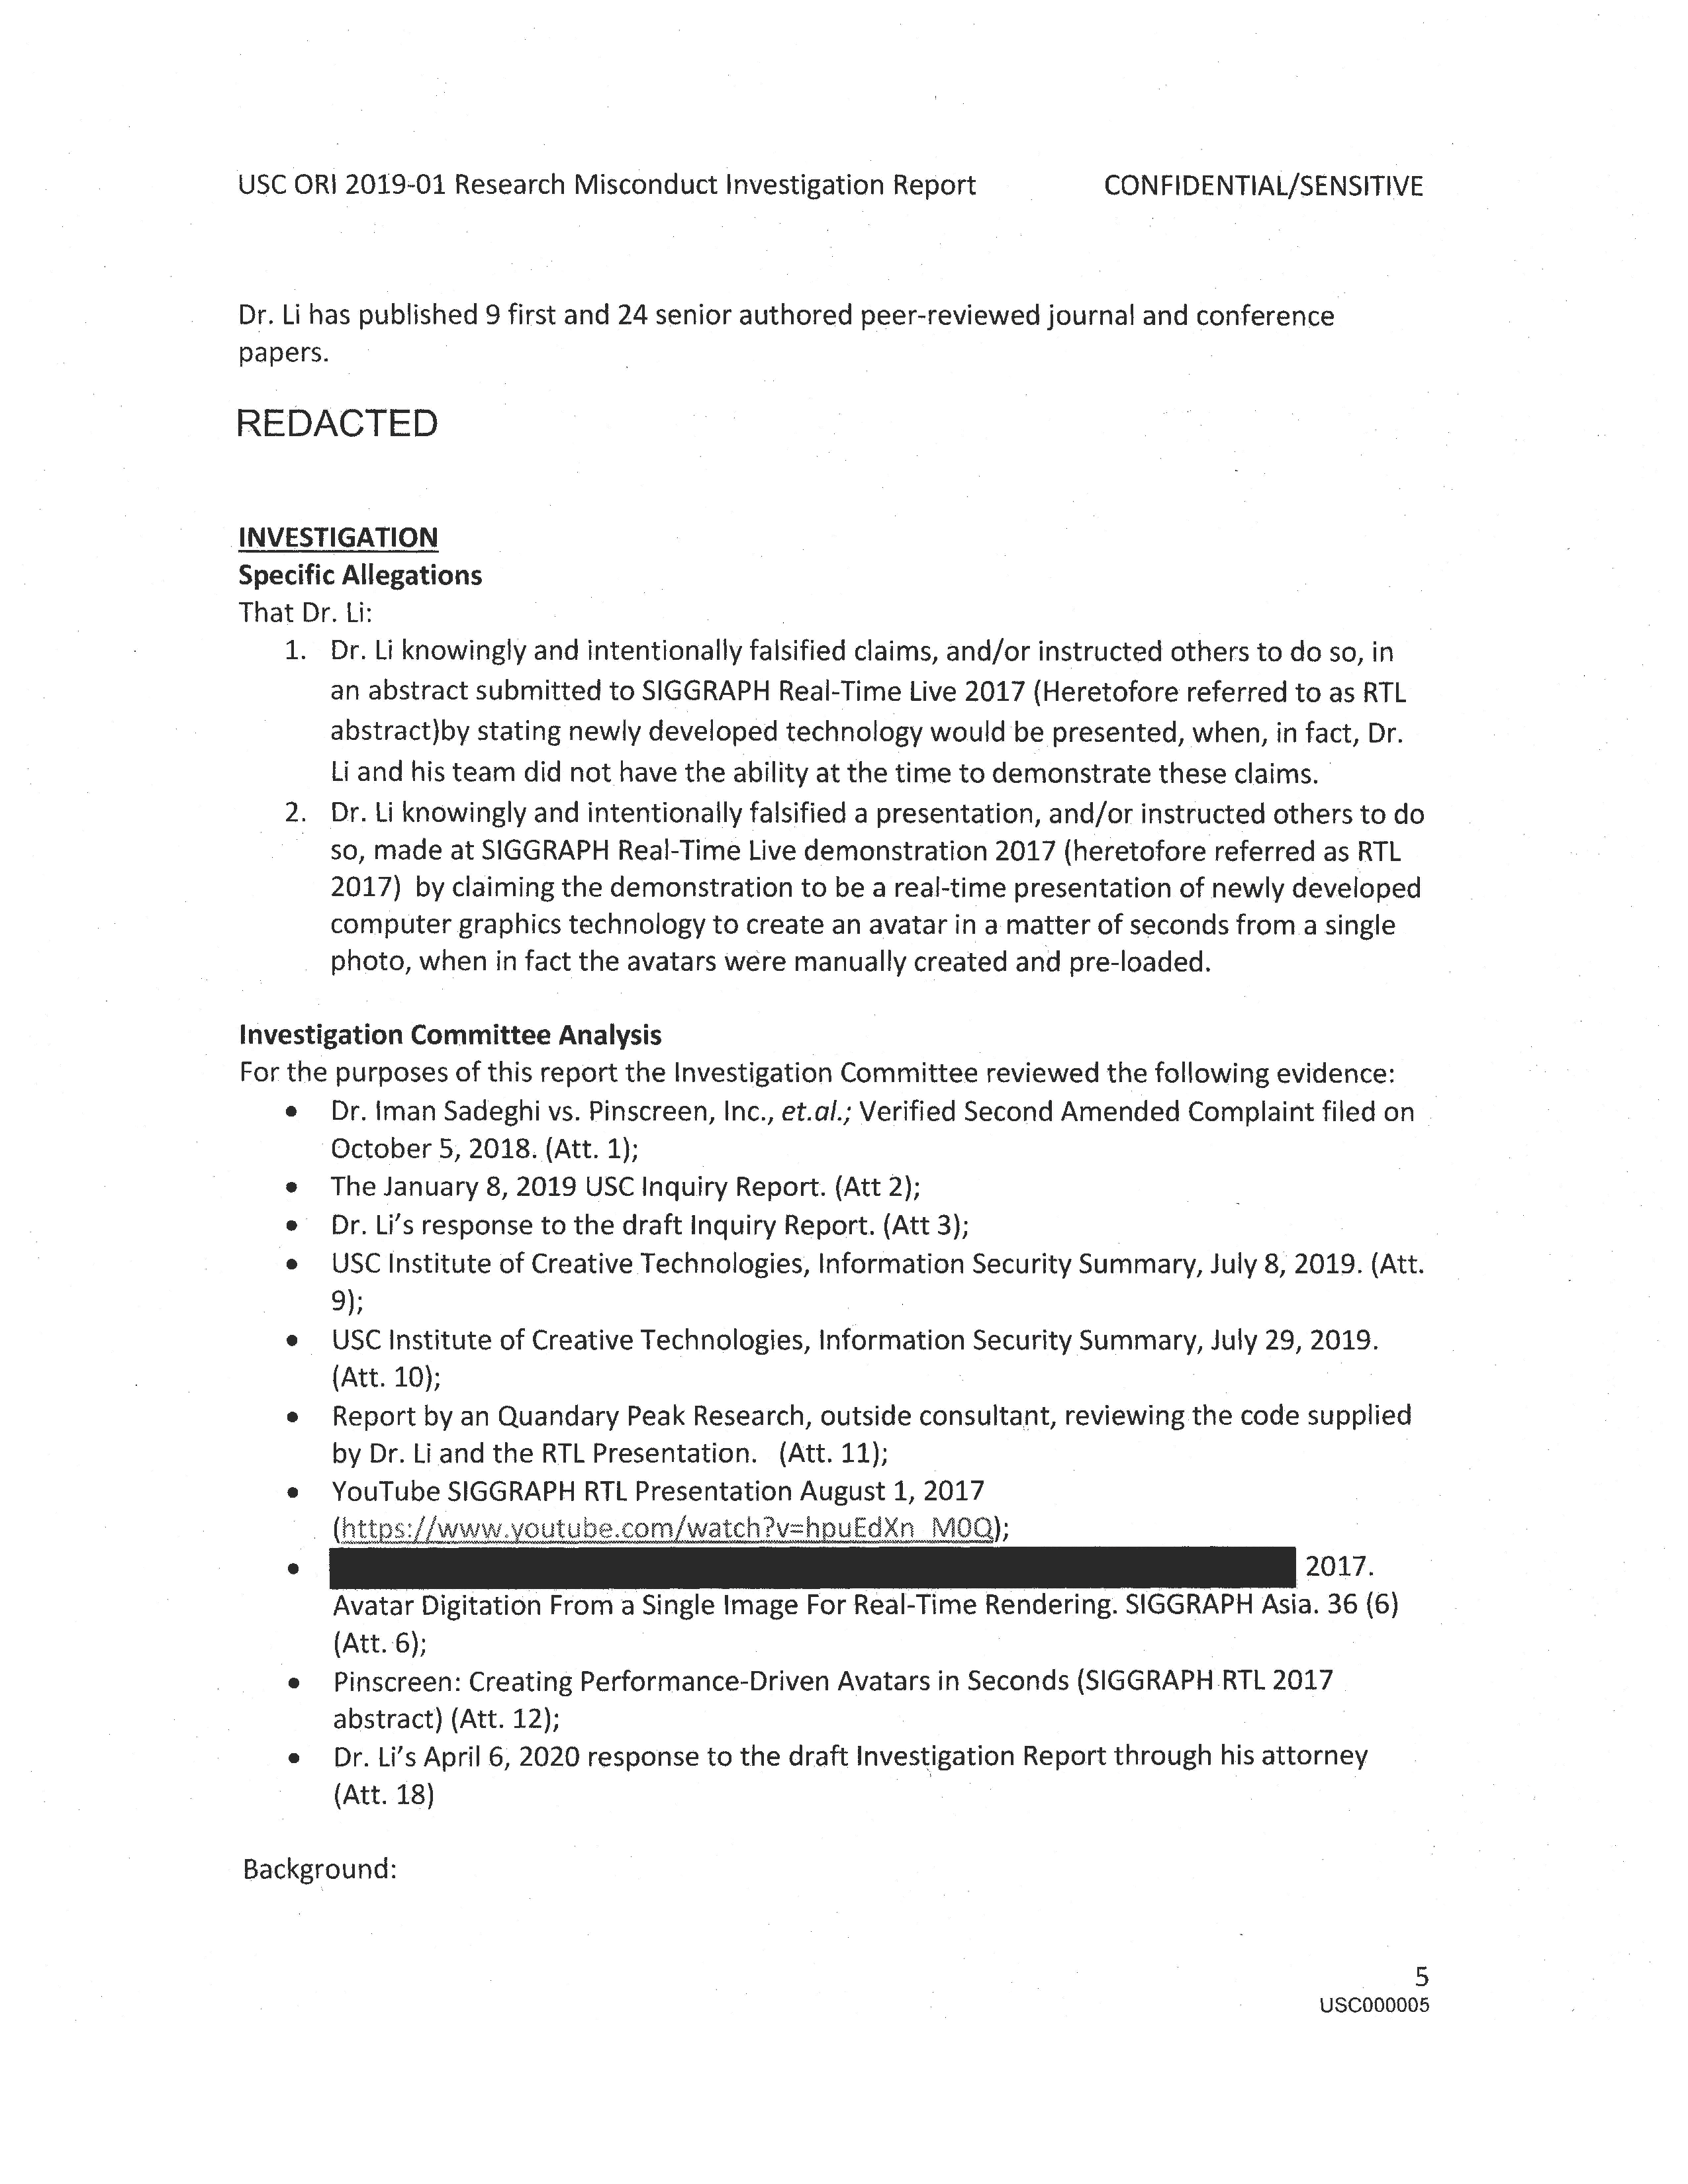 USC's Investigation Report re Hao Li's and Pinscreen's Scientific Misconduct at ACM SIGGRAPH RTL 2017 - Full Report Page 7